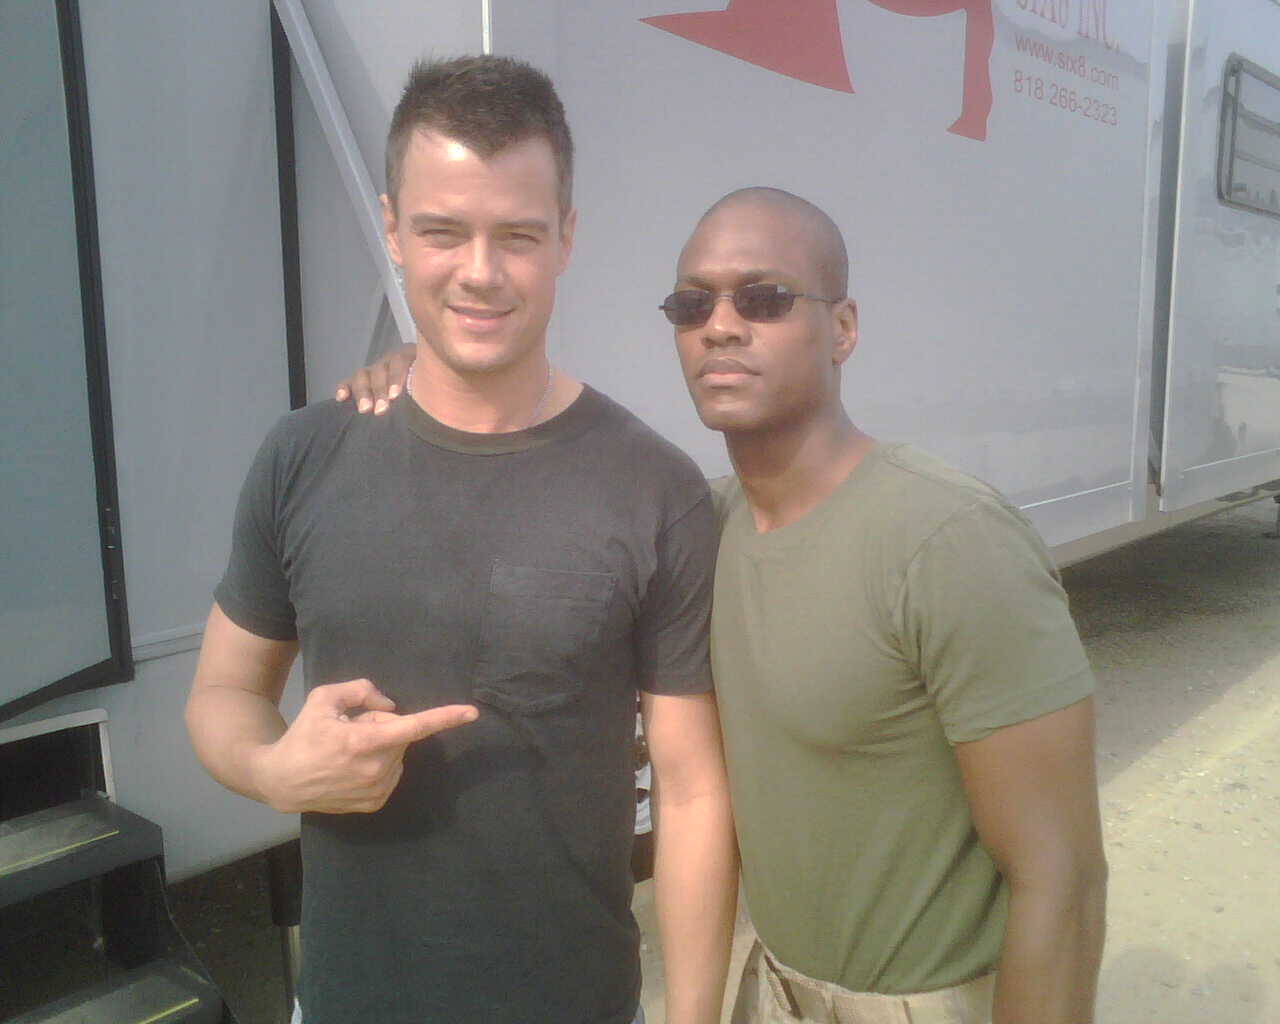 Josh and I on the set of Transformers